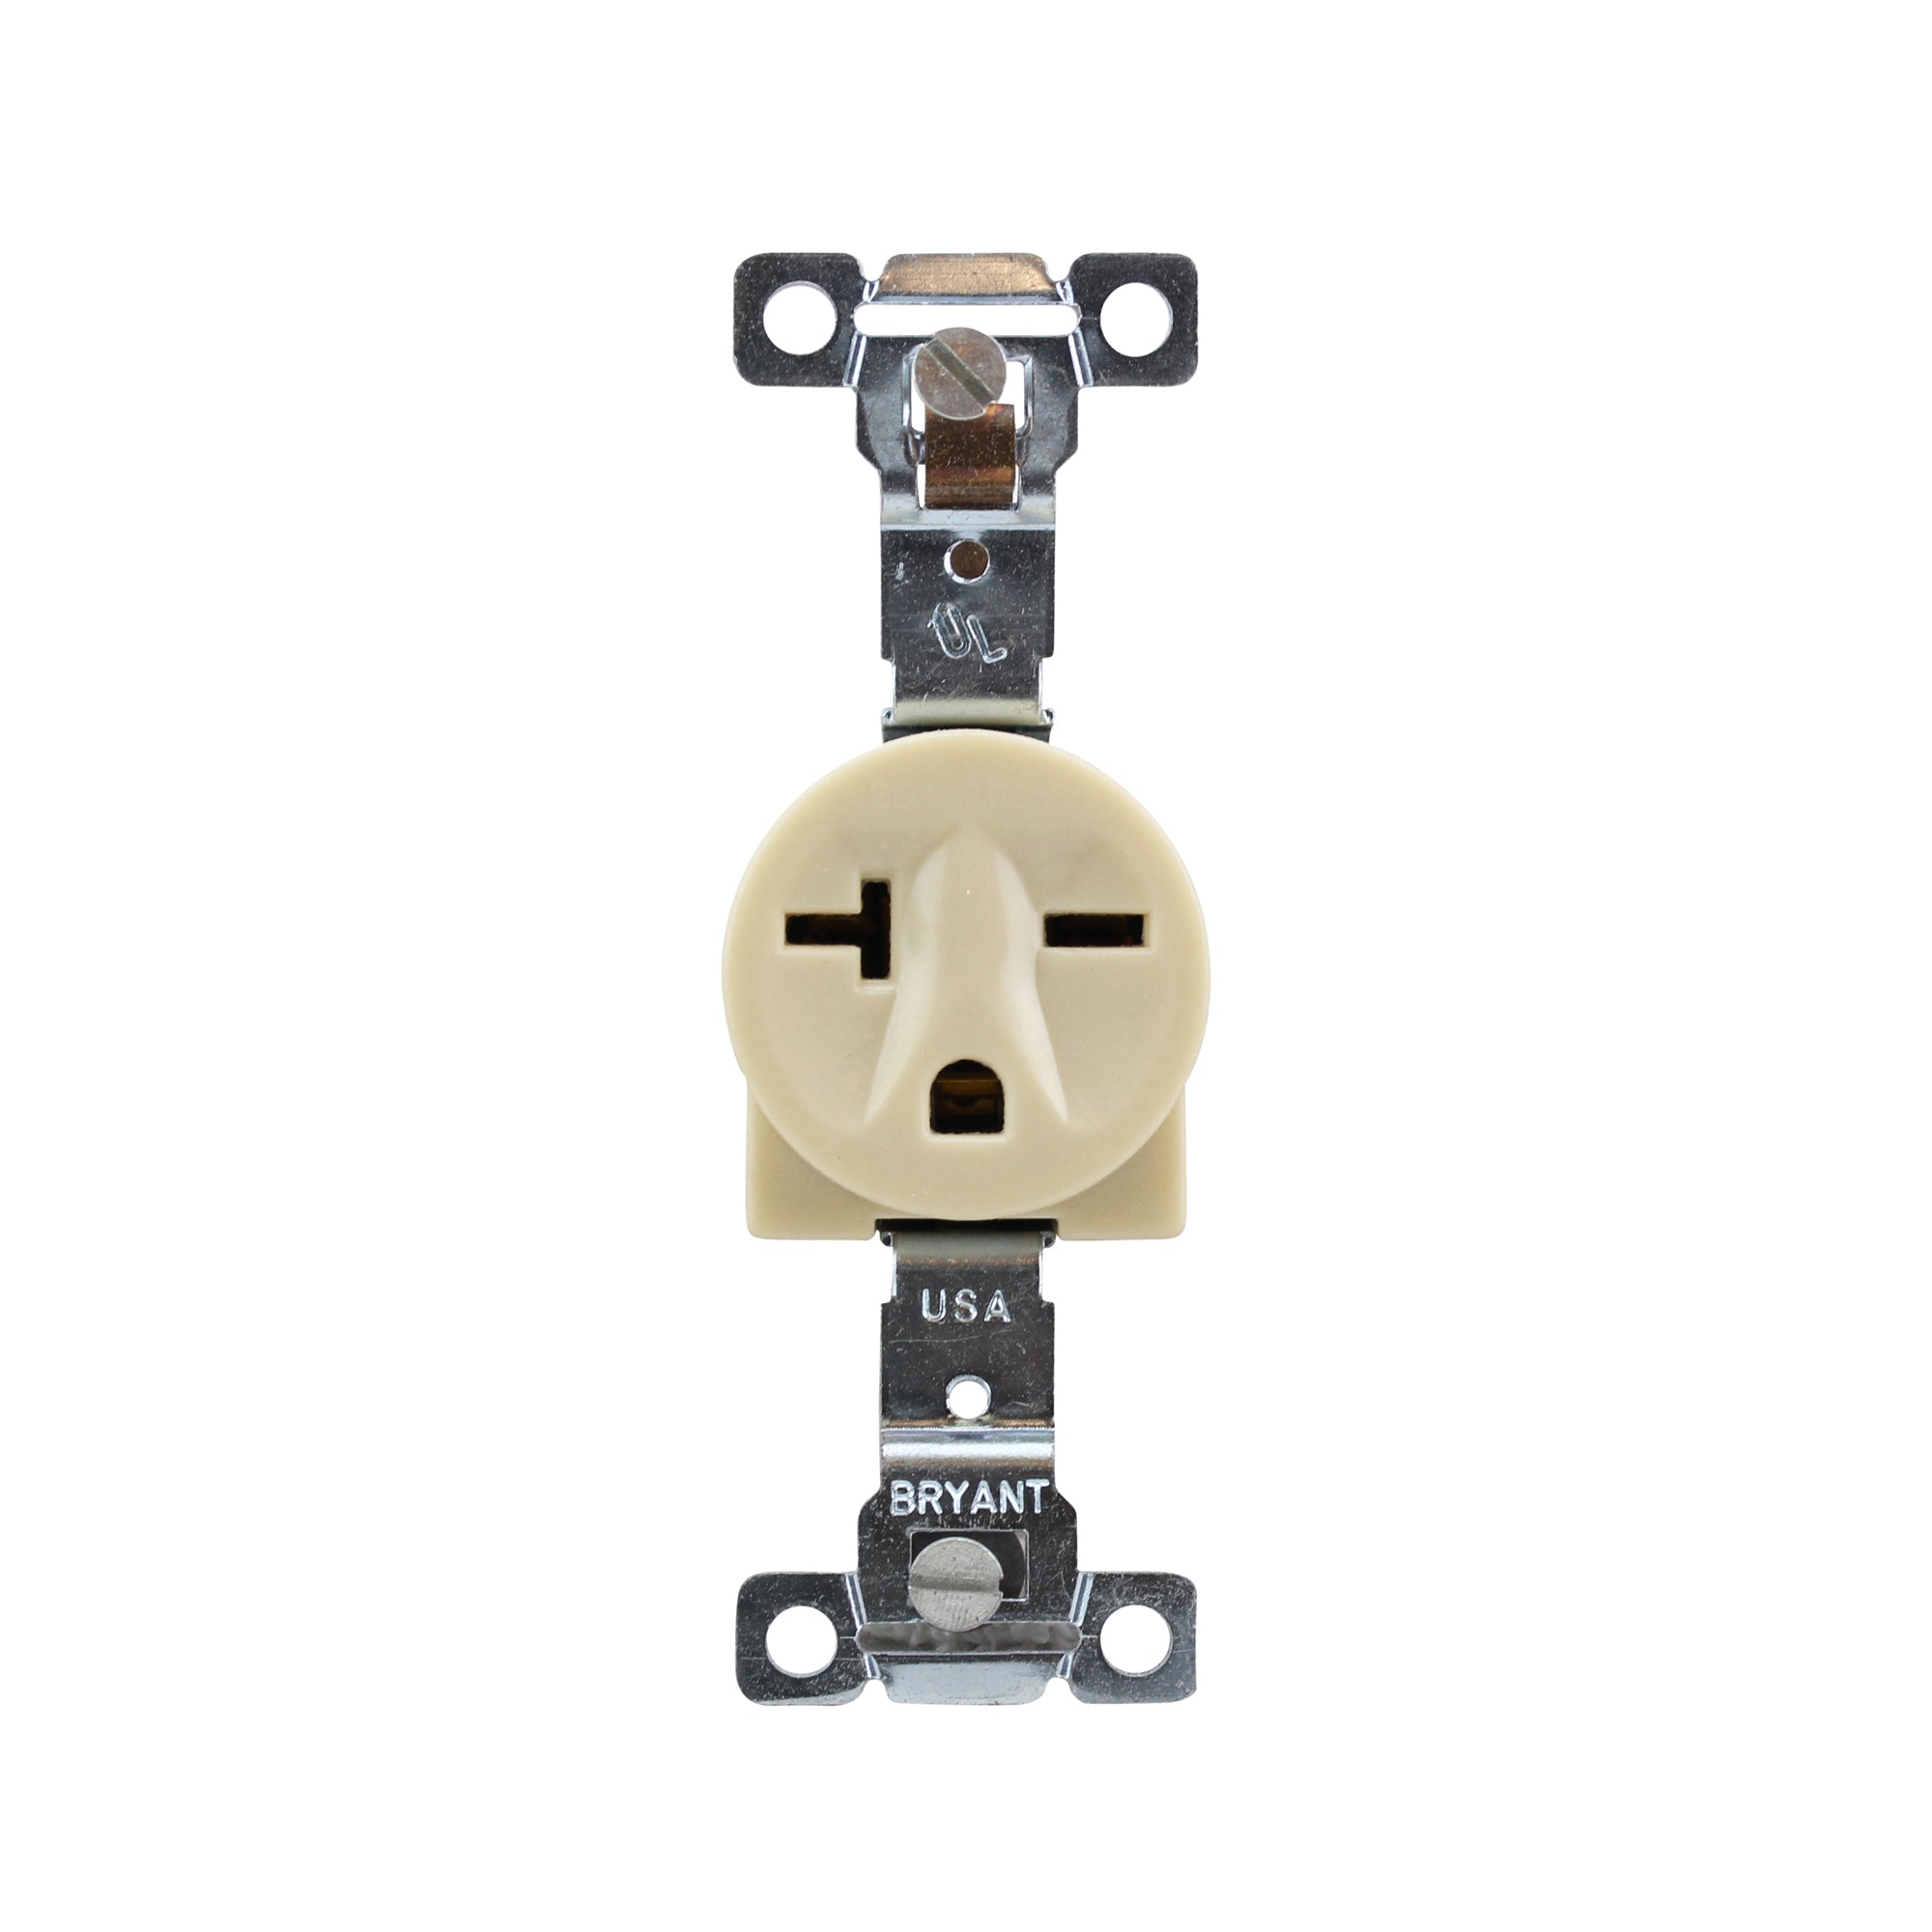 Bryant Manufacturing, BRYANT HUBBELL 5451 SINGLE RECEPTACLE SIDE WIRED 2P 3W 20A, IVORY (10 PACK)